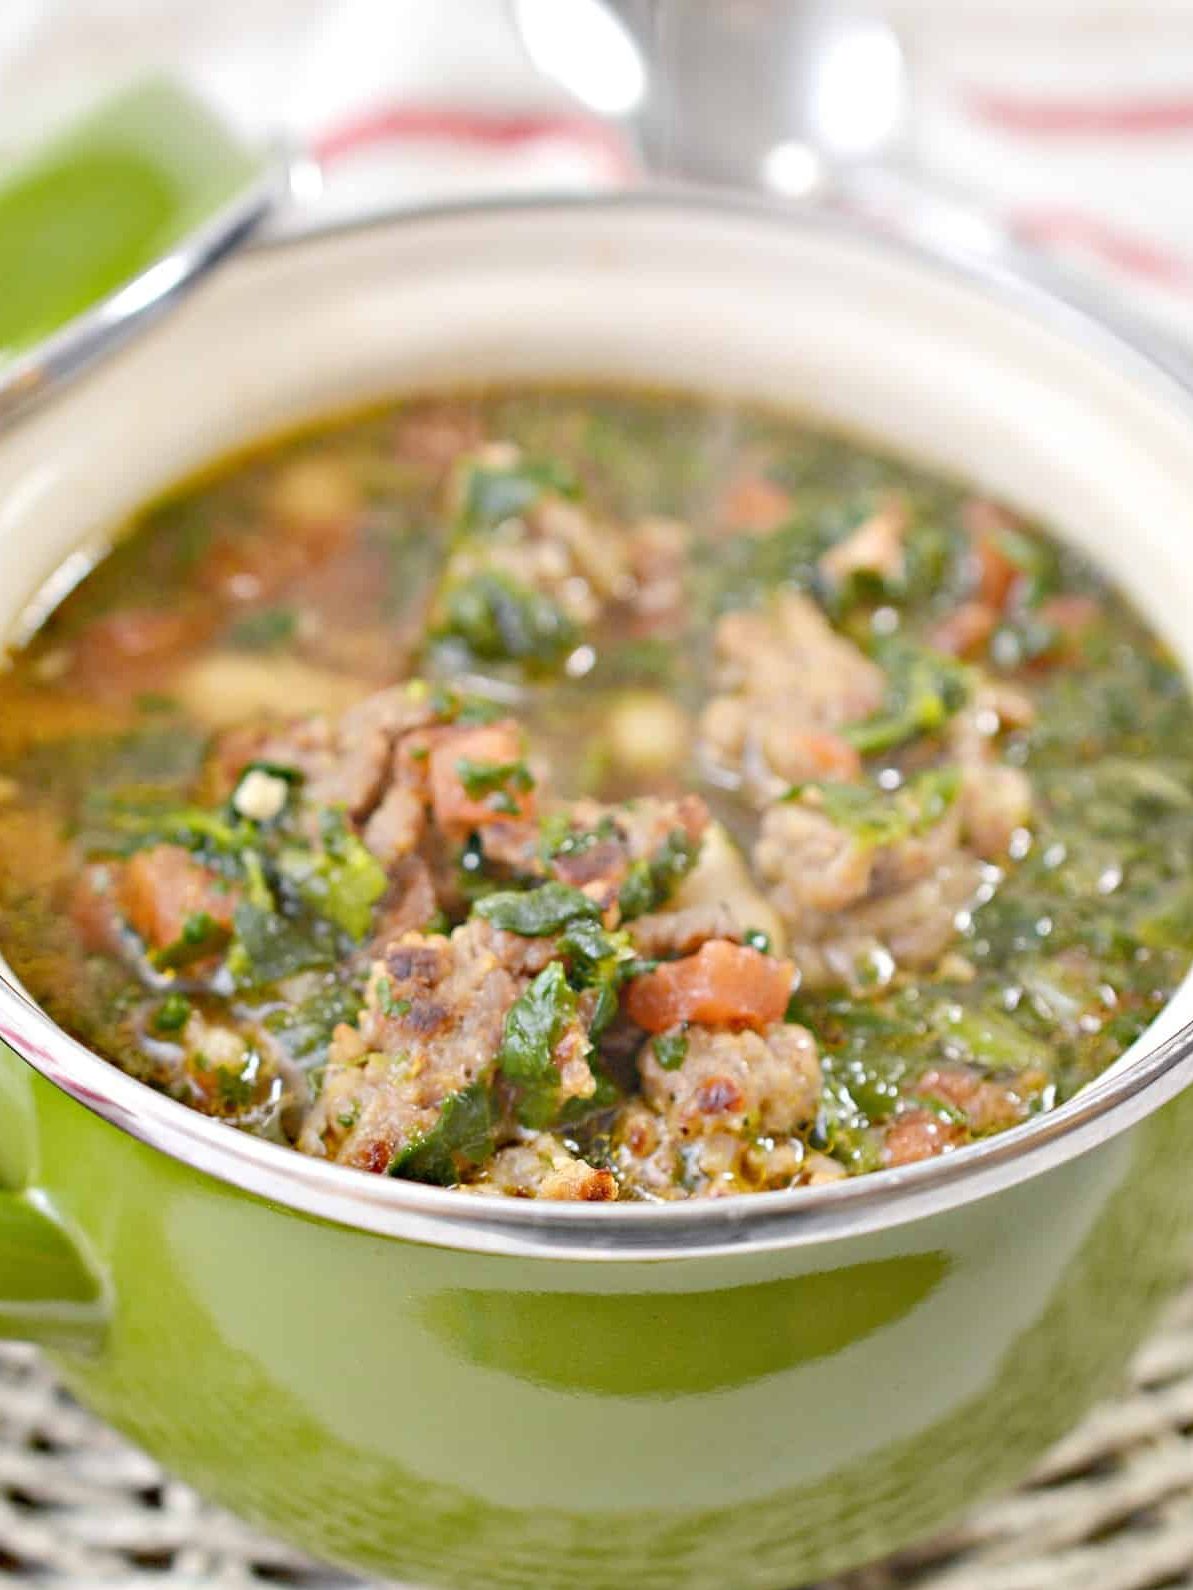 Winter White Bean and Italian Sausage Soup, winter sausage soup
sausage soup, sausage soup recipe